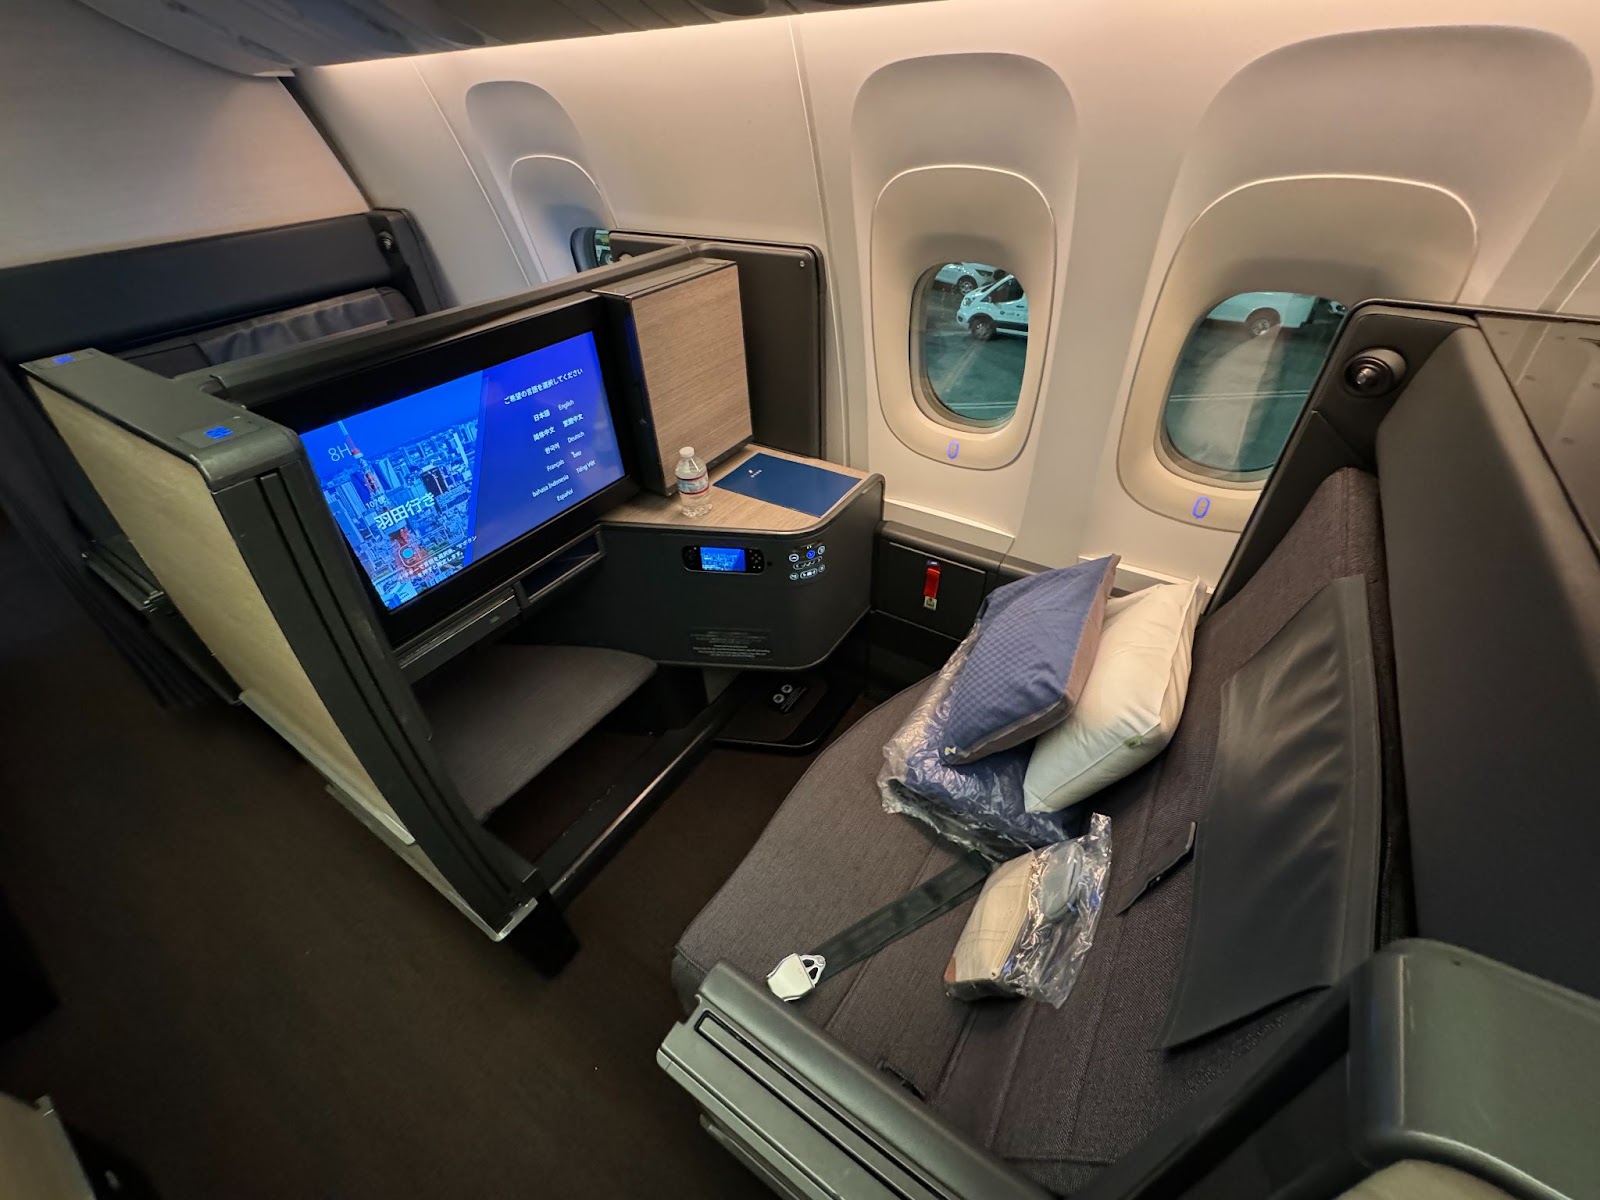 All Nippon Airways "The Room" business class seat